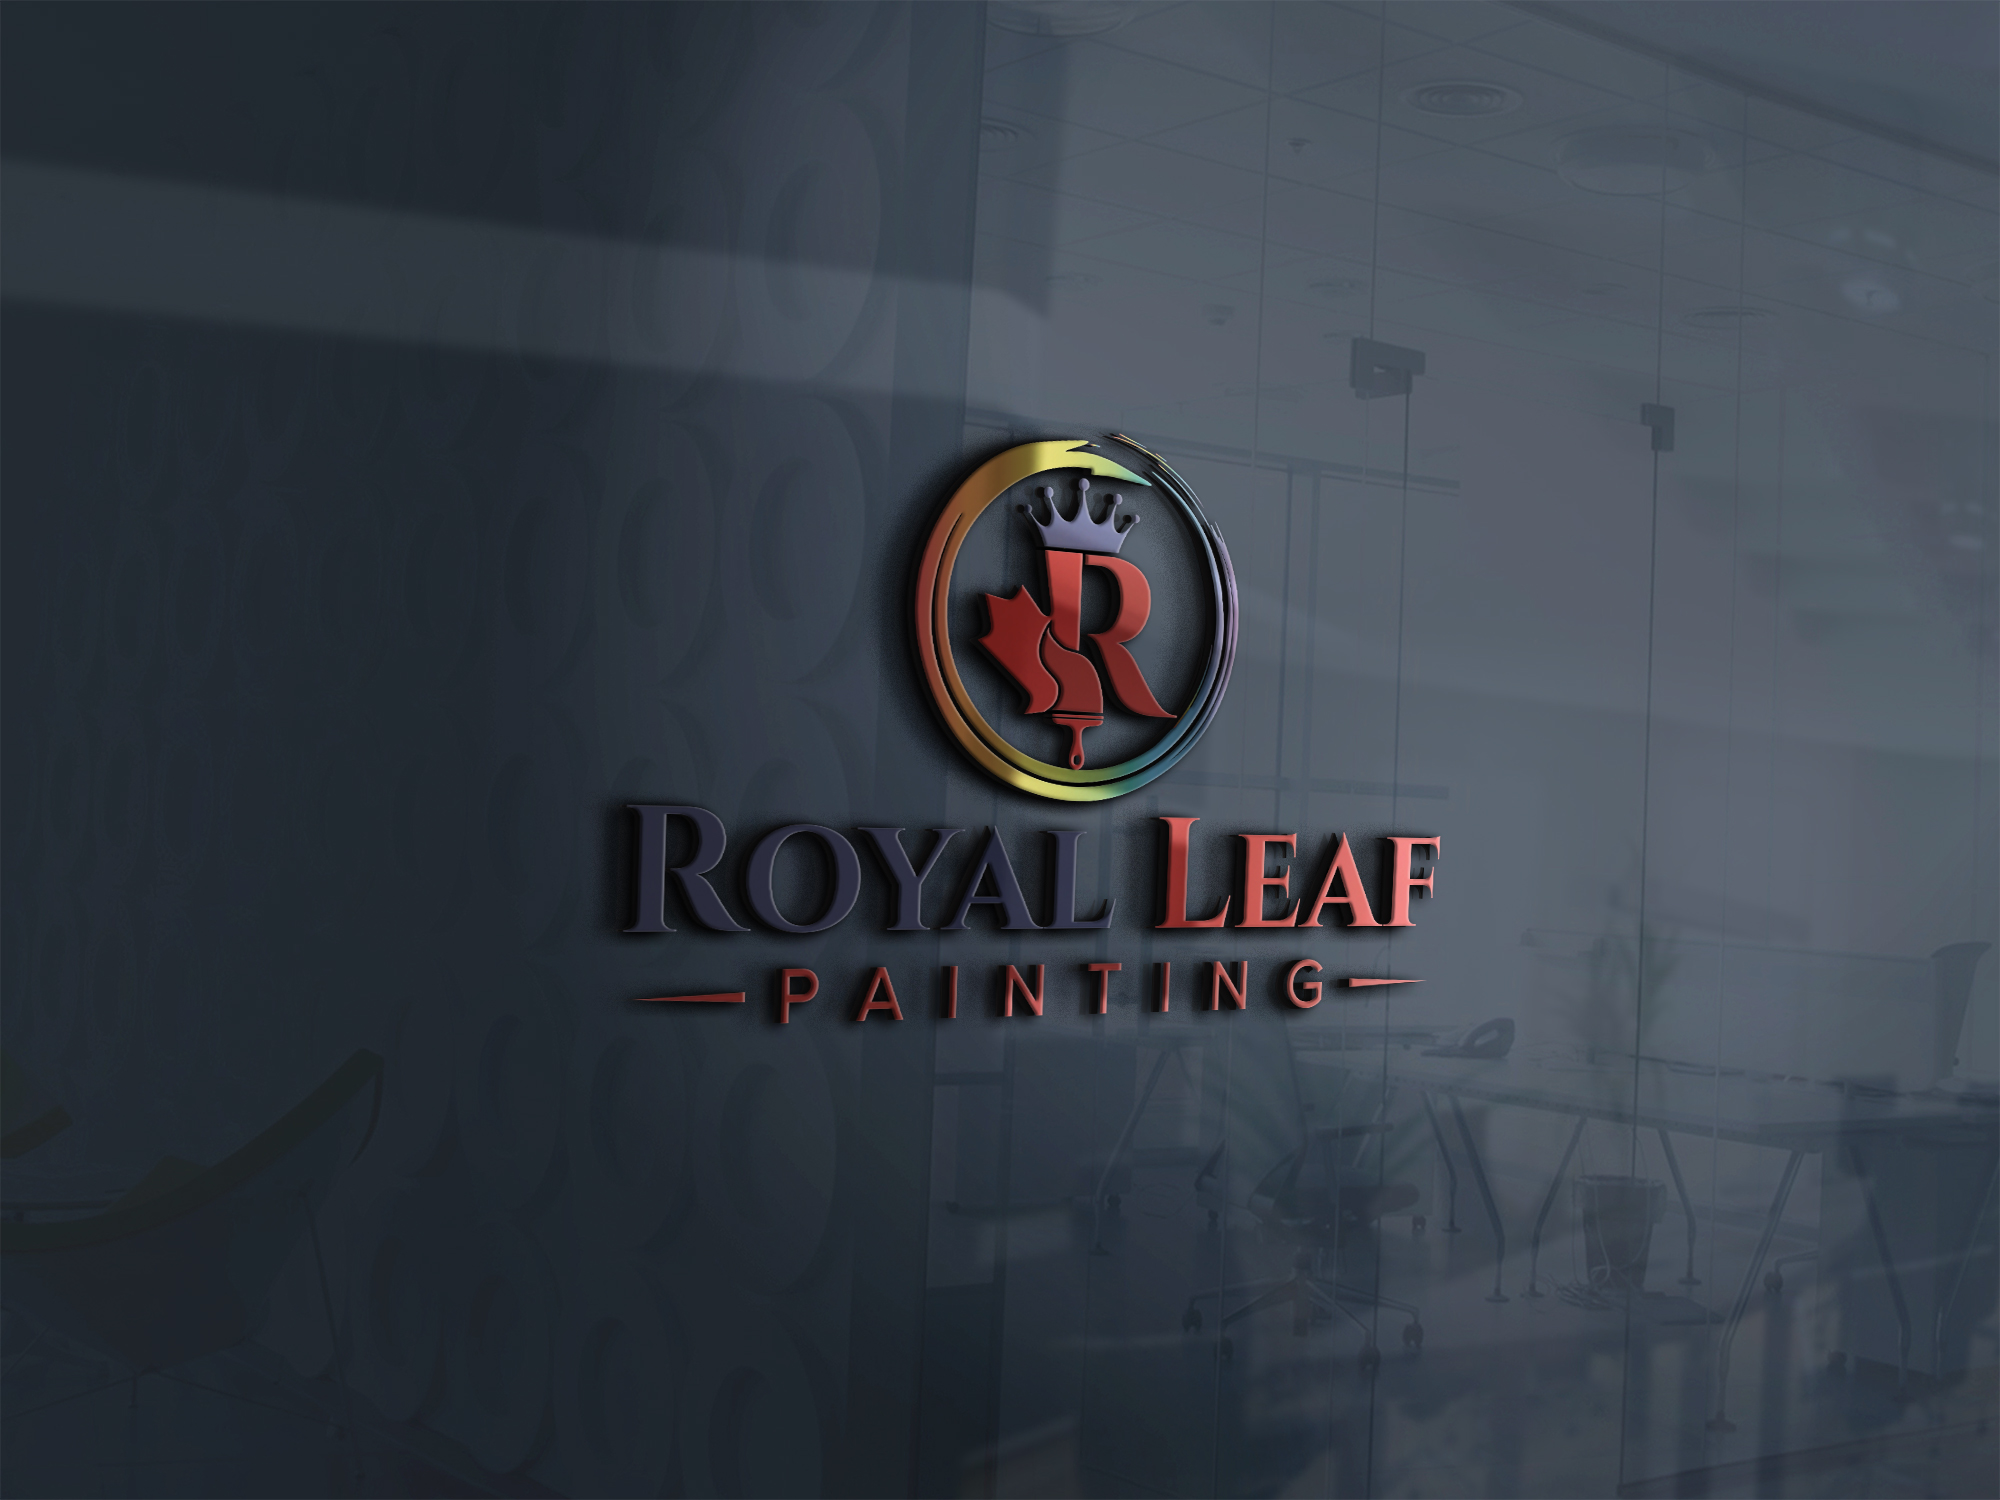 about company royal leaf painting